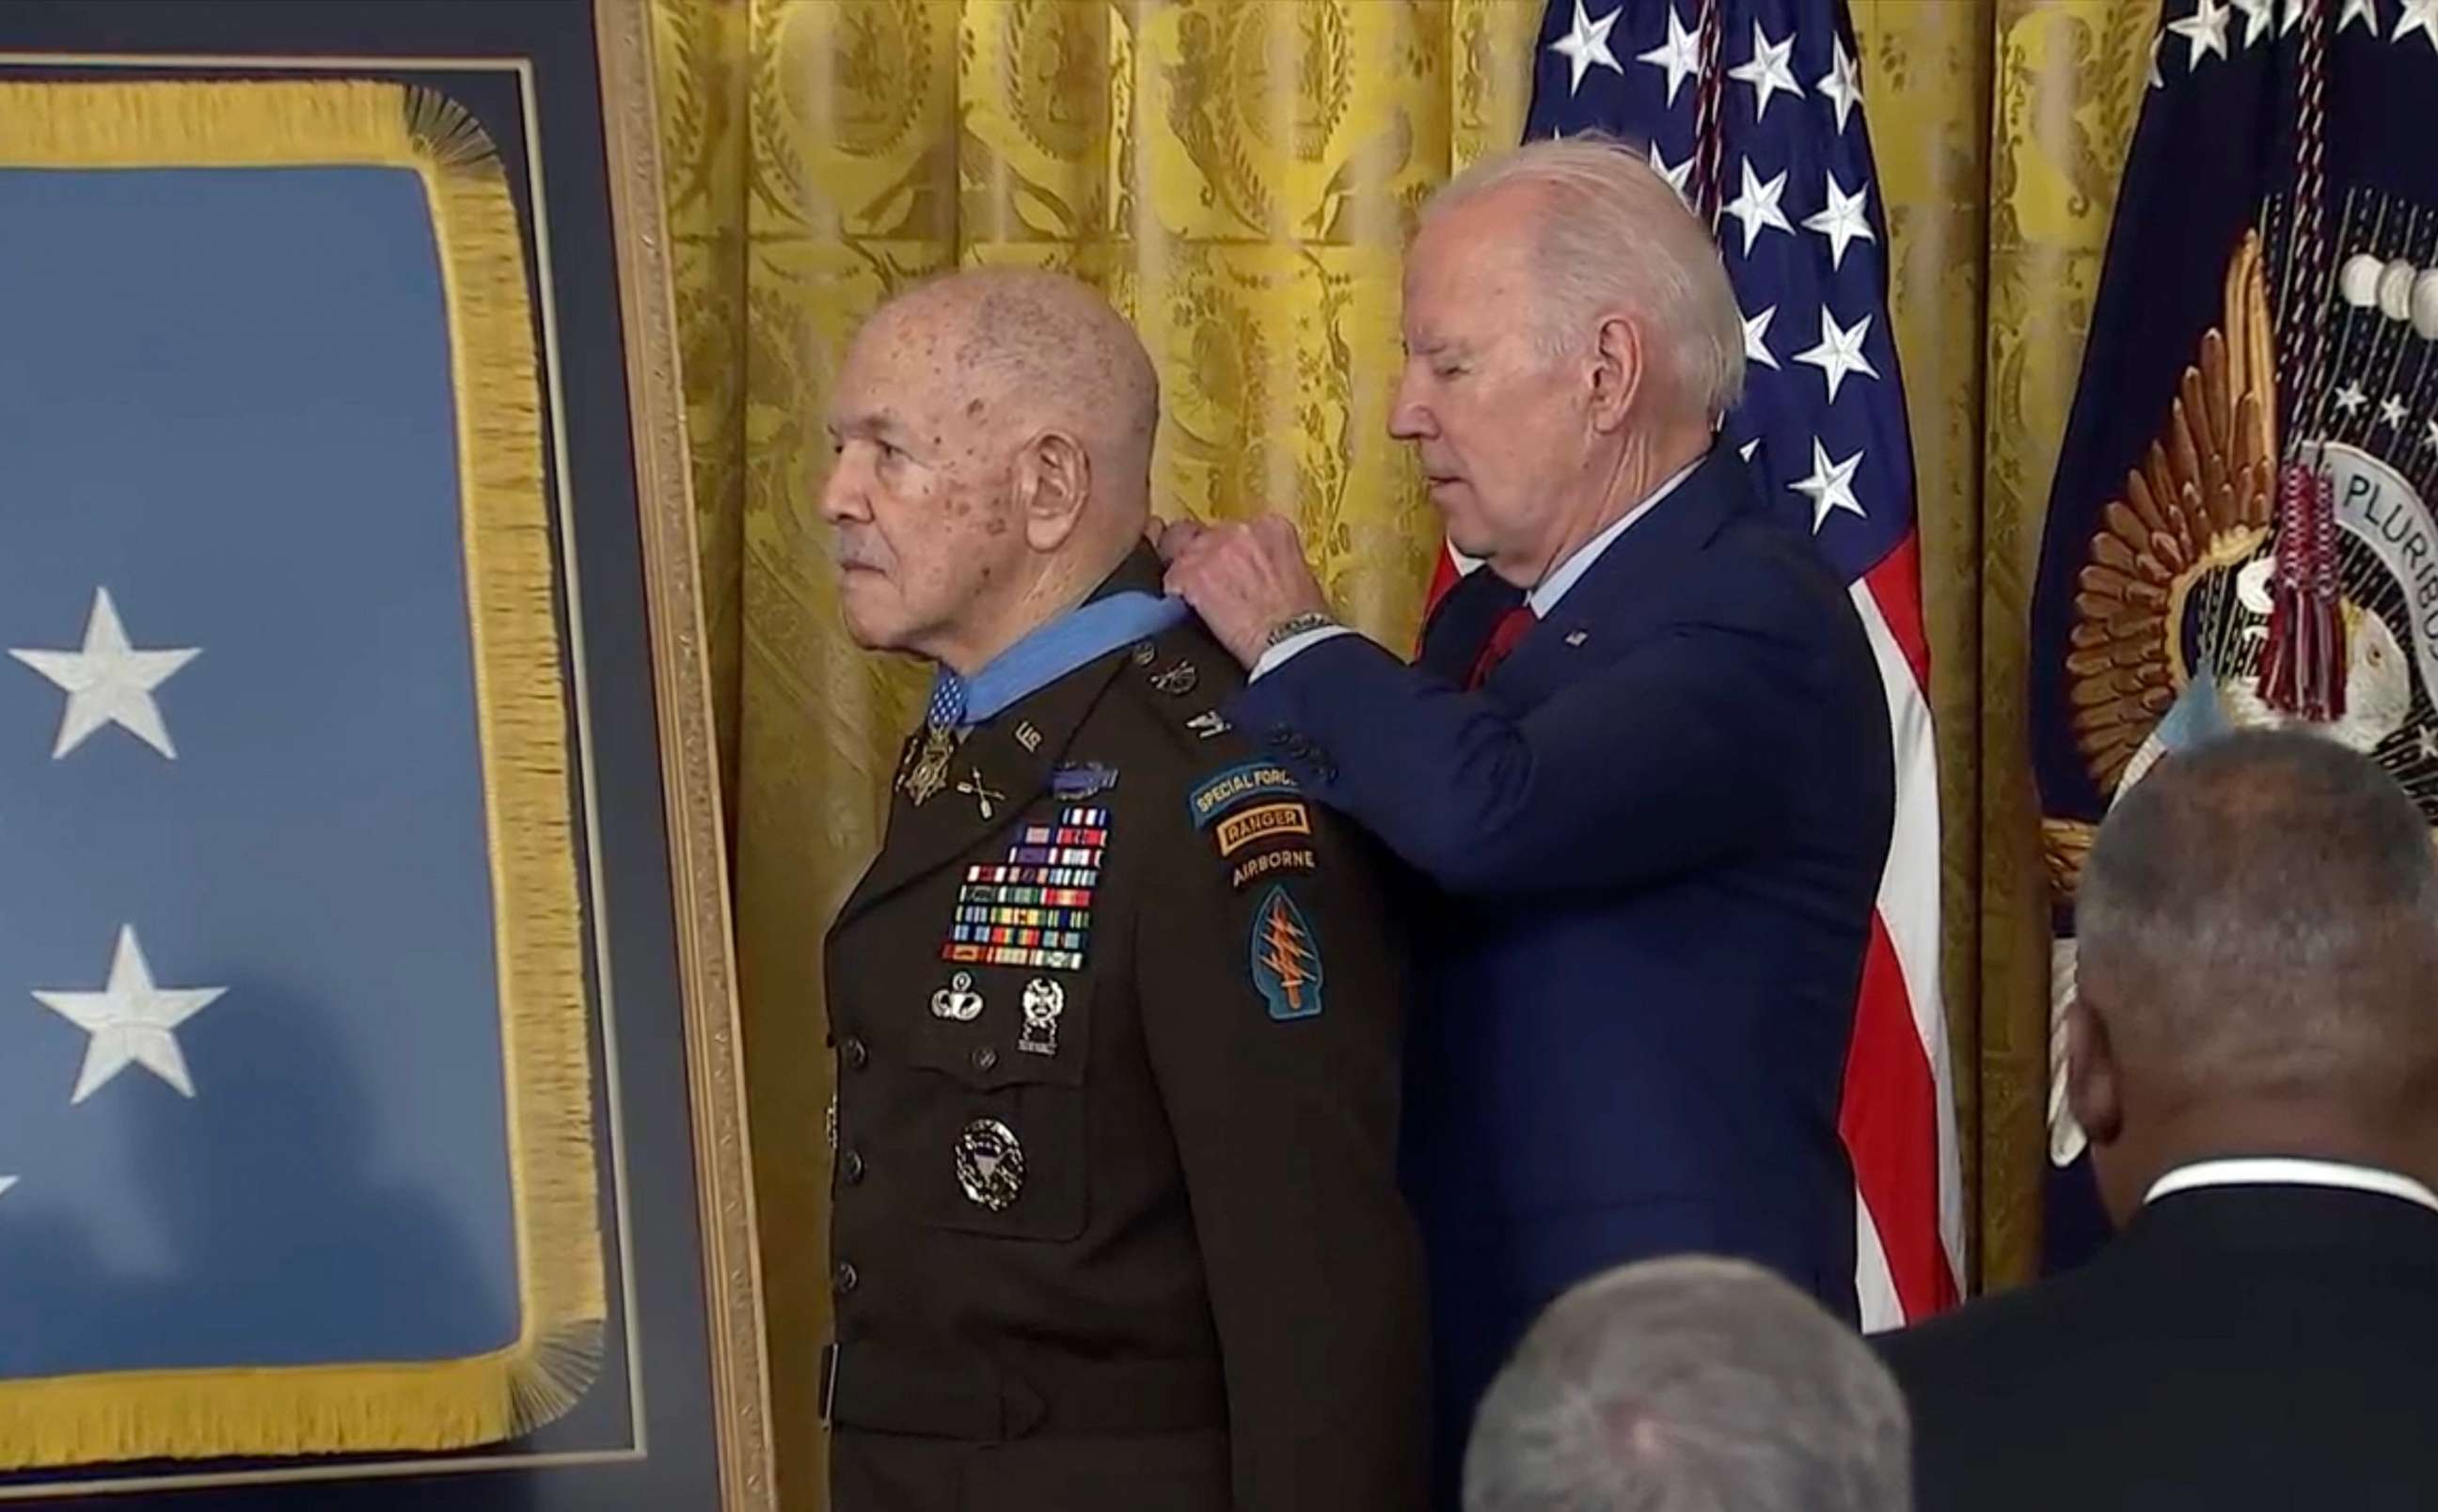 PHOTO: President Joe Biden stands with Vietnam War veteran, Retired US Army Colonel Paris Davis, before awarding him the Medal of Honor, in the East Room of the White House in Washington, DC, on March 3, 2023.